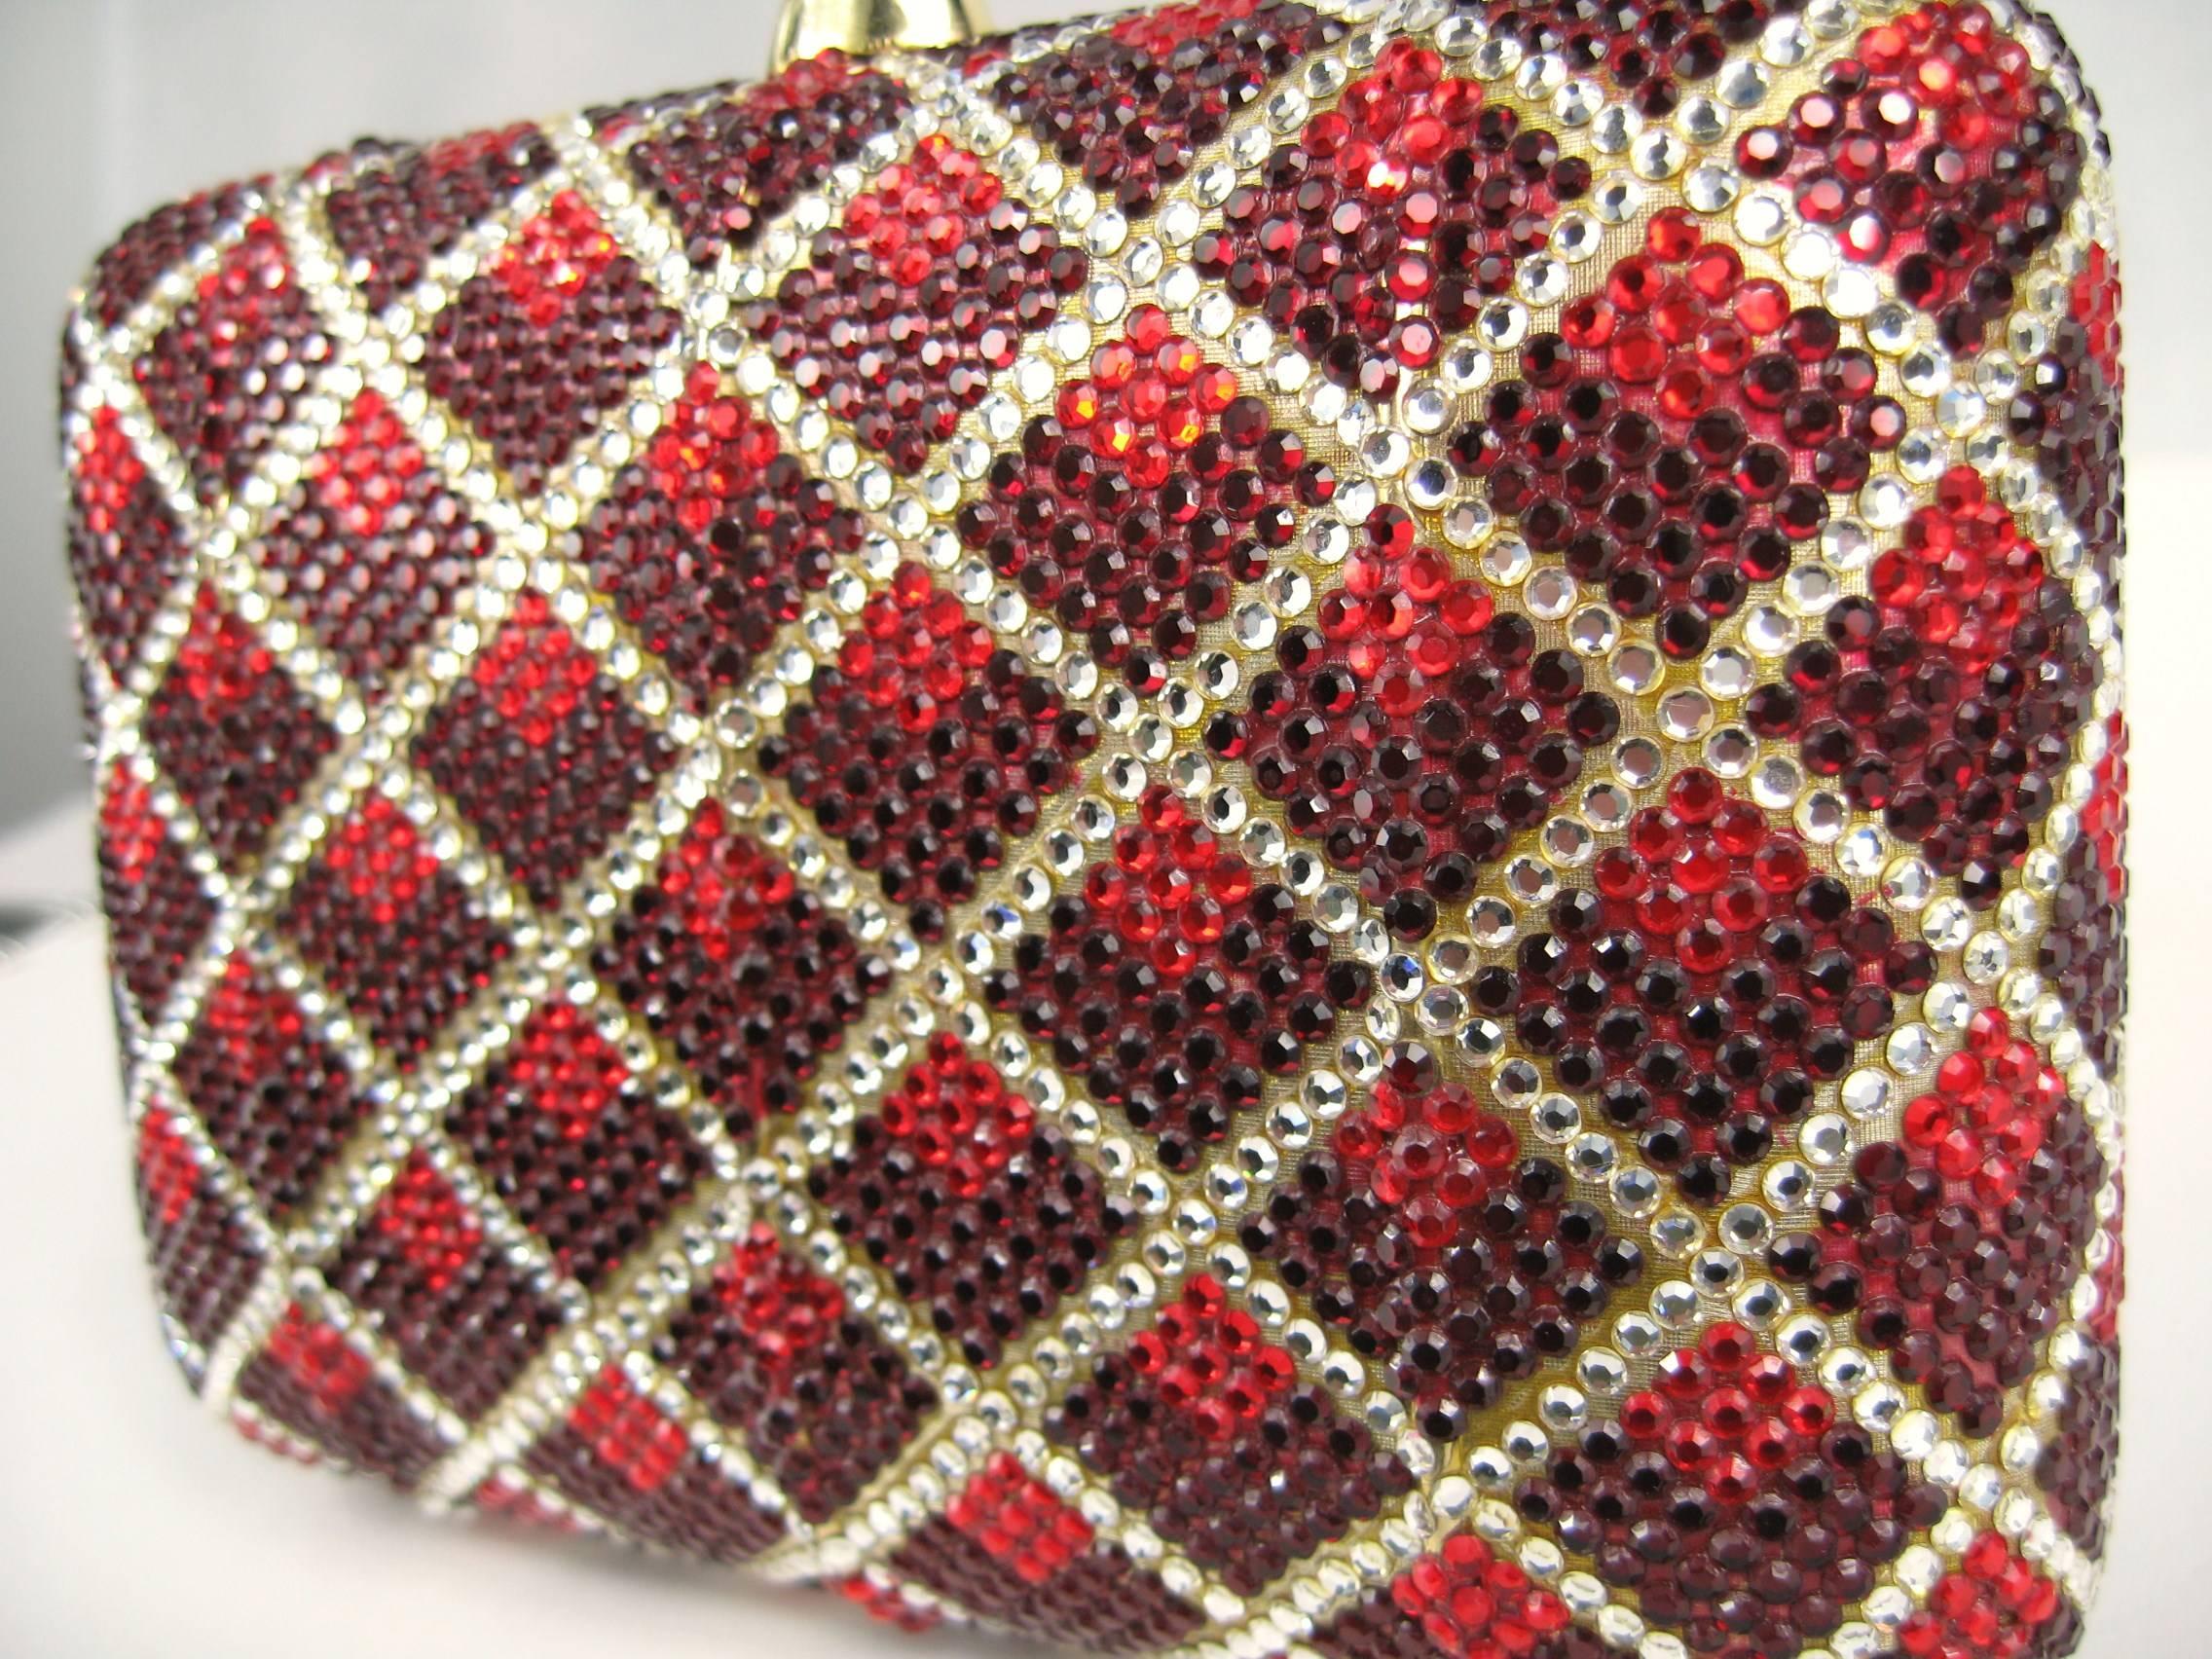 Stunning Clear and Red Swarovski Crystal on this magnificent Judith Leiber Clutch. A must-have for the upcoming holiday season, as well as any black tie event. Runway ready! Gold leather interior that holds an attached chain shoulder strap